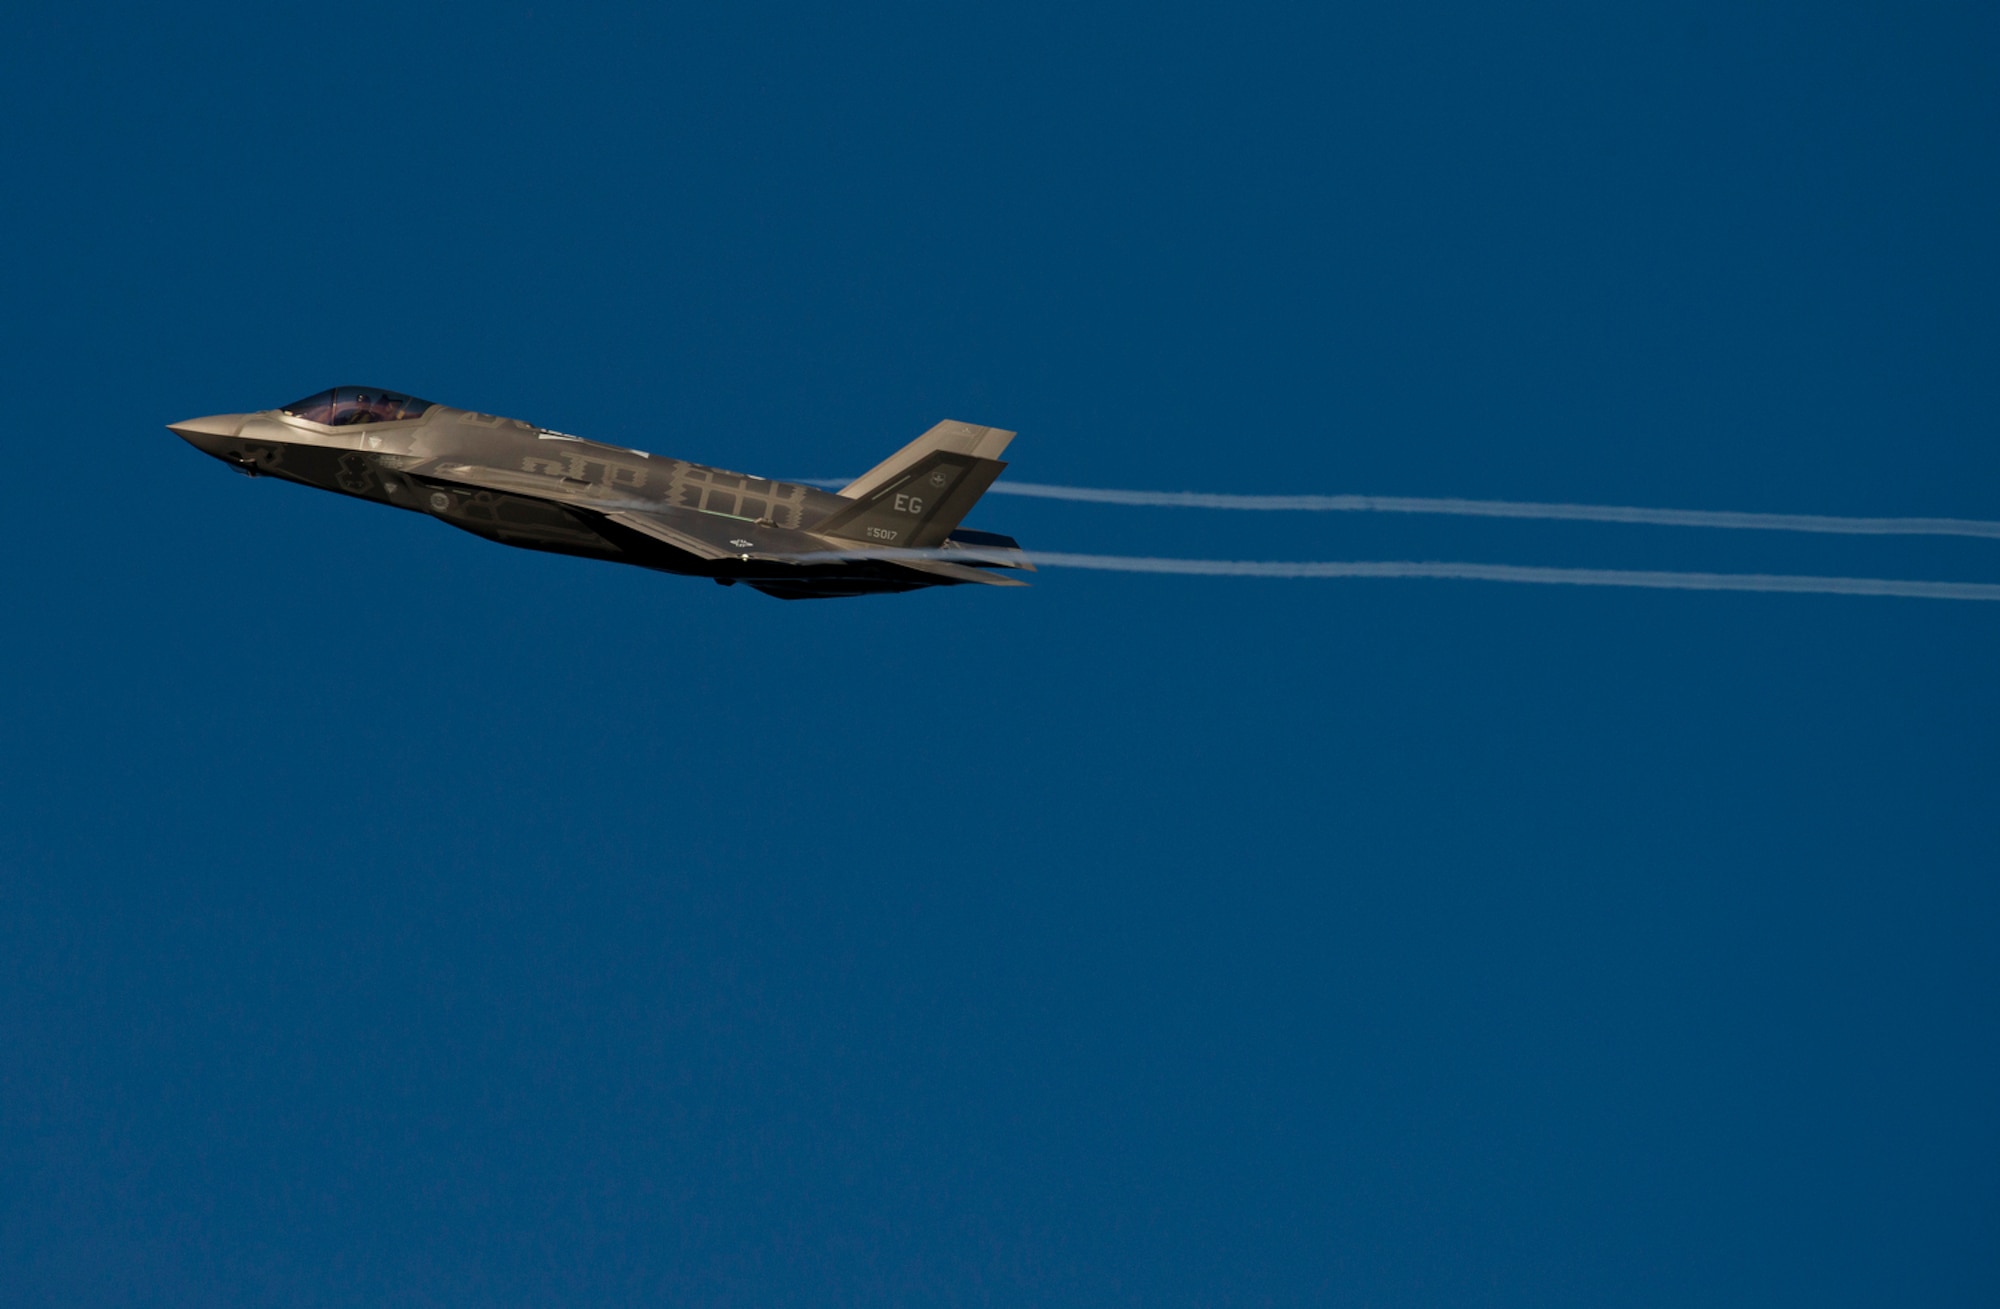 A F-35A Lightning II from the 33rd Fighter Wing streaks across the sky above Eglin Air Force Base, Fl. while coming in for landing after a training sortie. The 334rd Fighter Wing is responsible for F-35 A/B/C Lightning II pilot and maintainer training for the Marine Corps, the Navy, the Air Force and, in the future, at least eight coalition partners. Initially, 59 aircraft and three flying squadrons, one for each service/aircraft variant, will be established at Eglin. (U.S. Air Force photo/Tech. Sgt. Bennie J. Davis III)